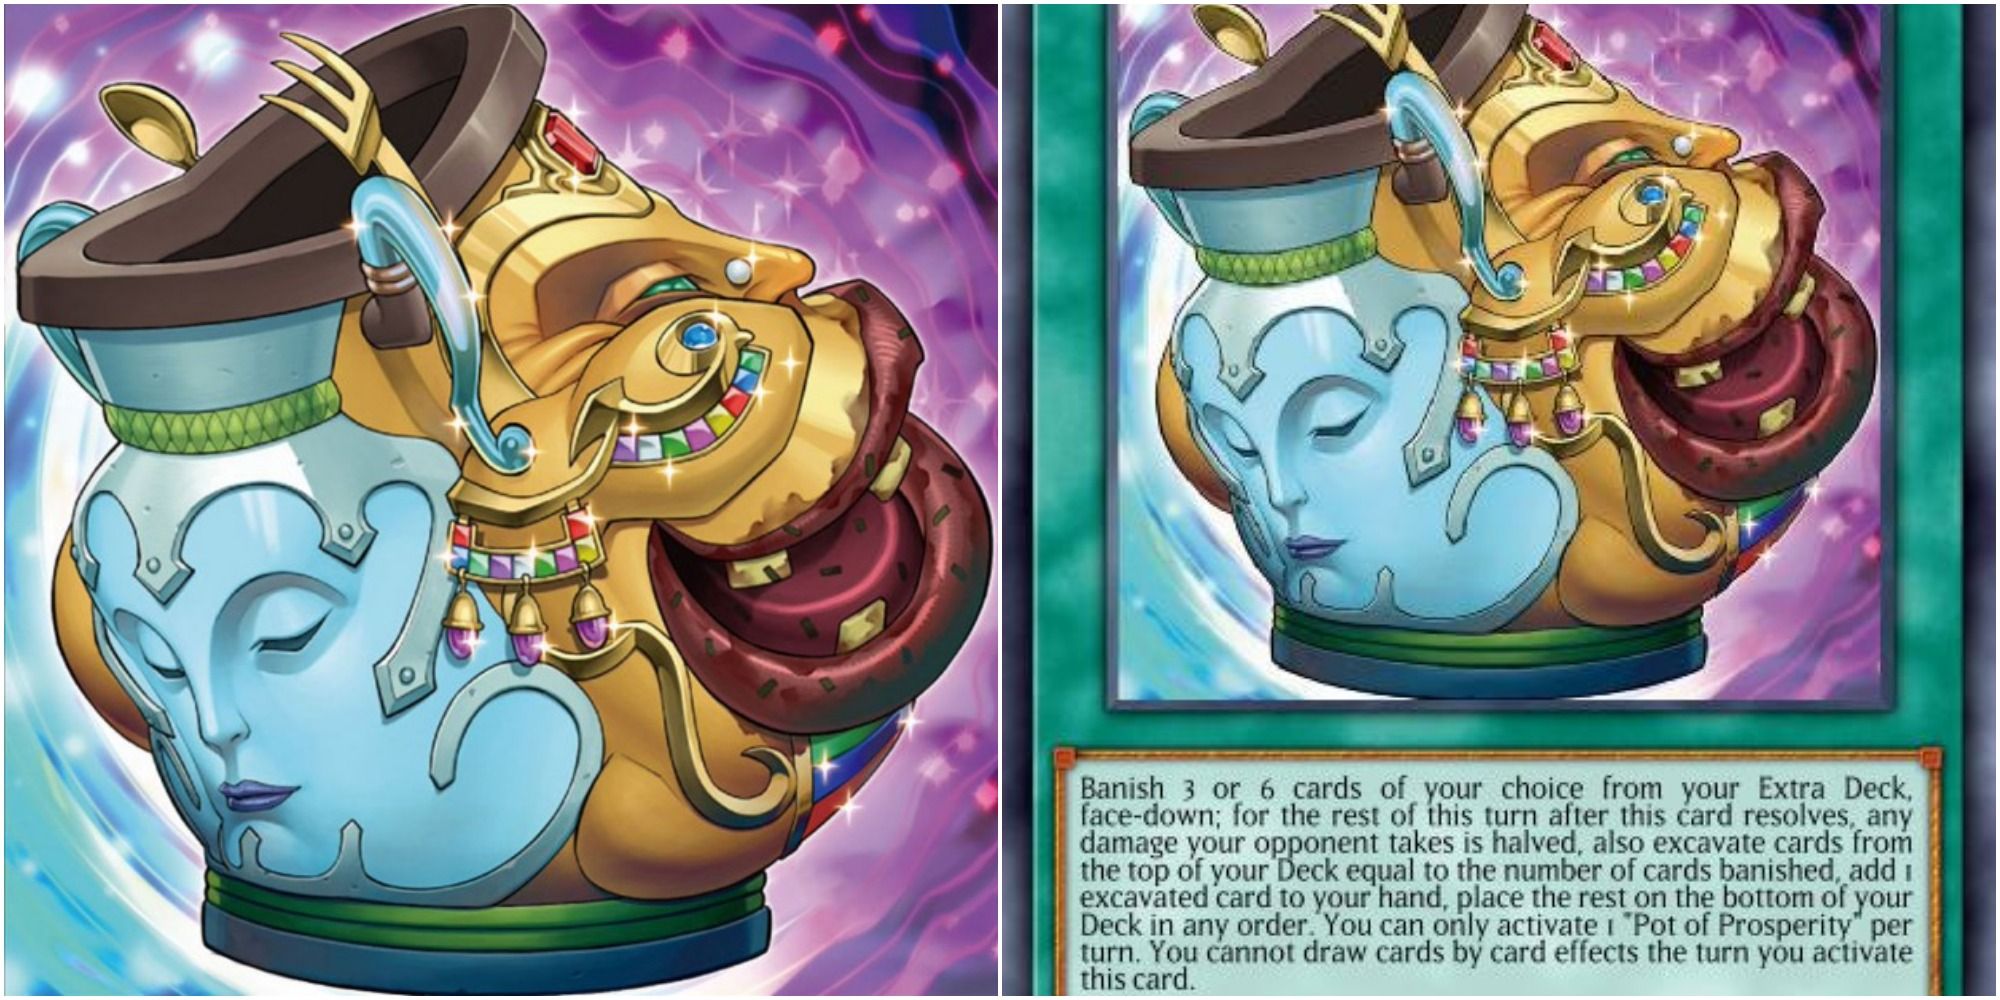 Pot Of Prosperity card art and text